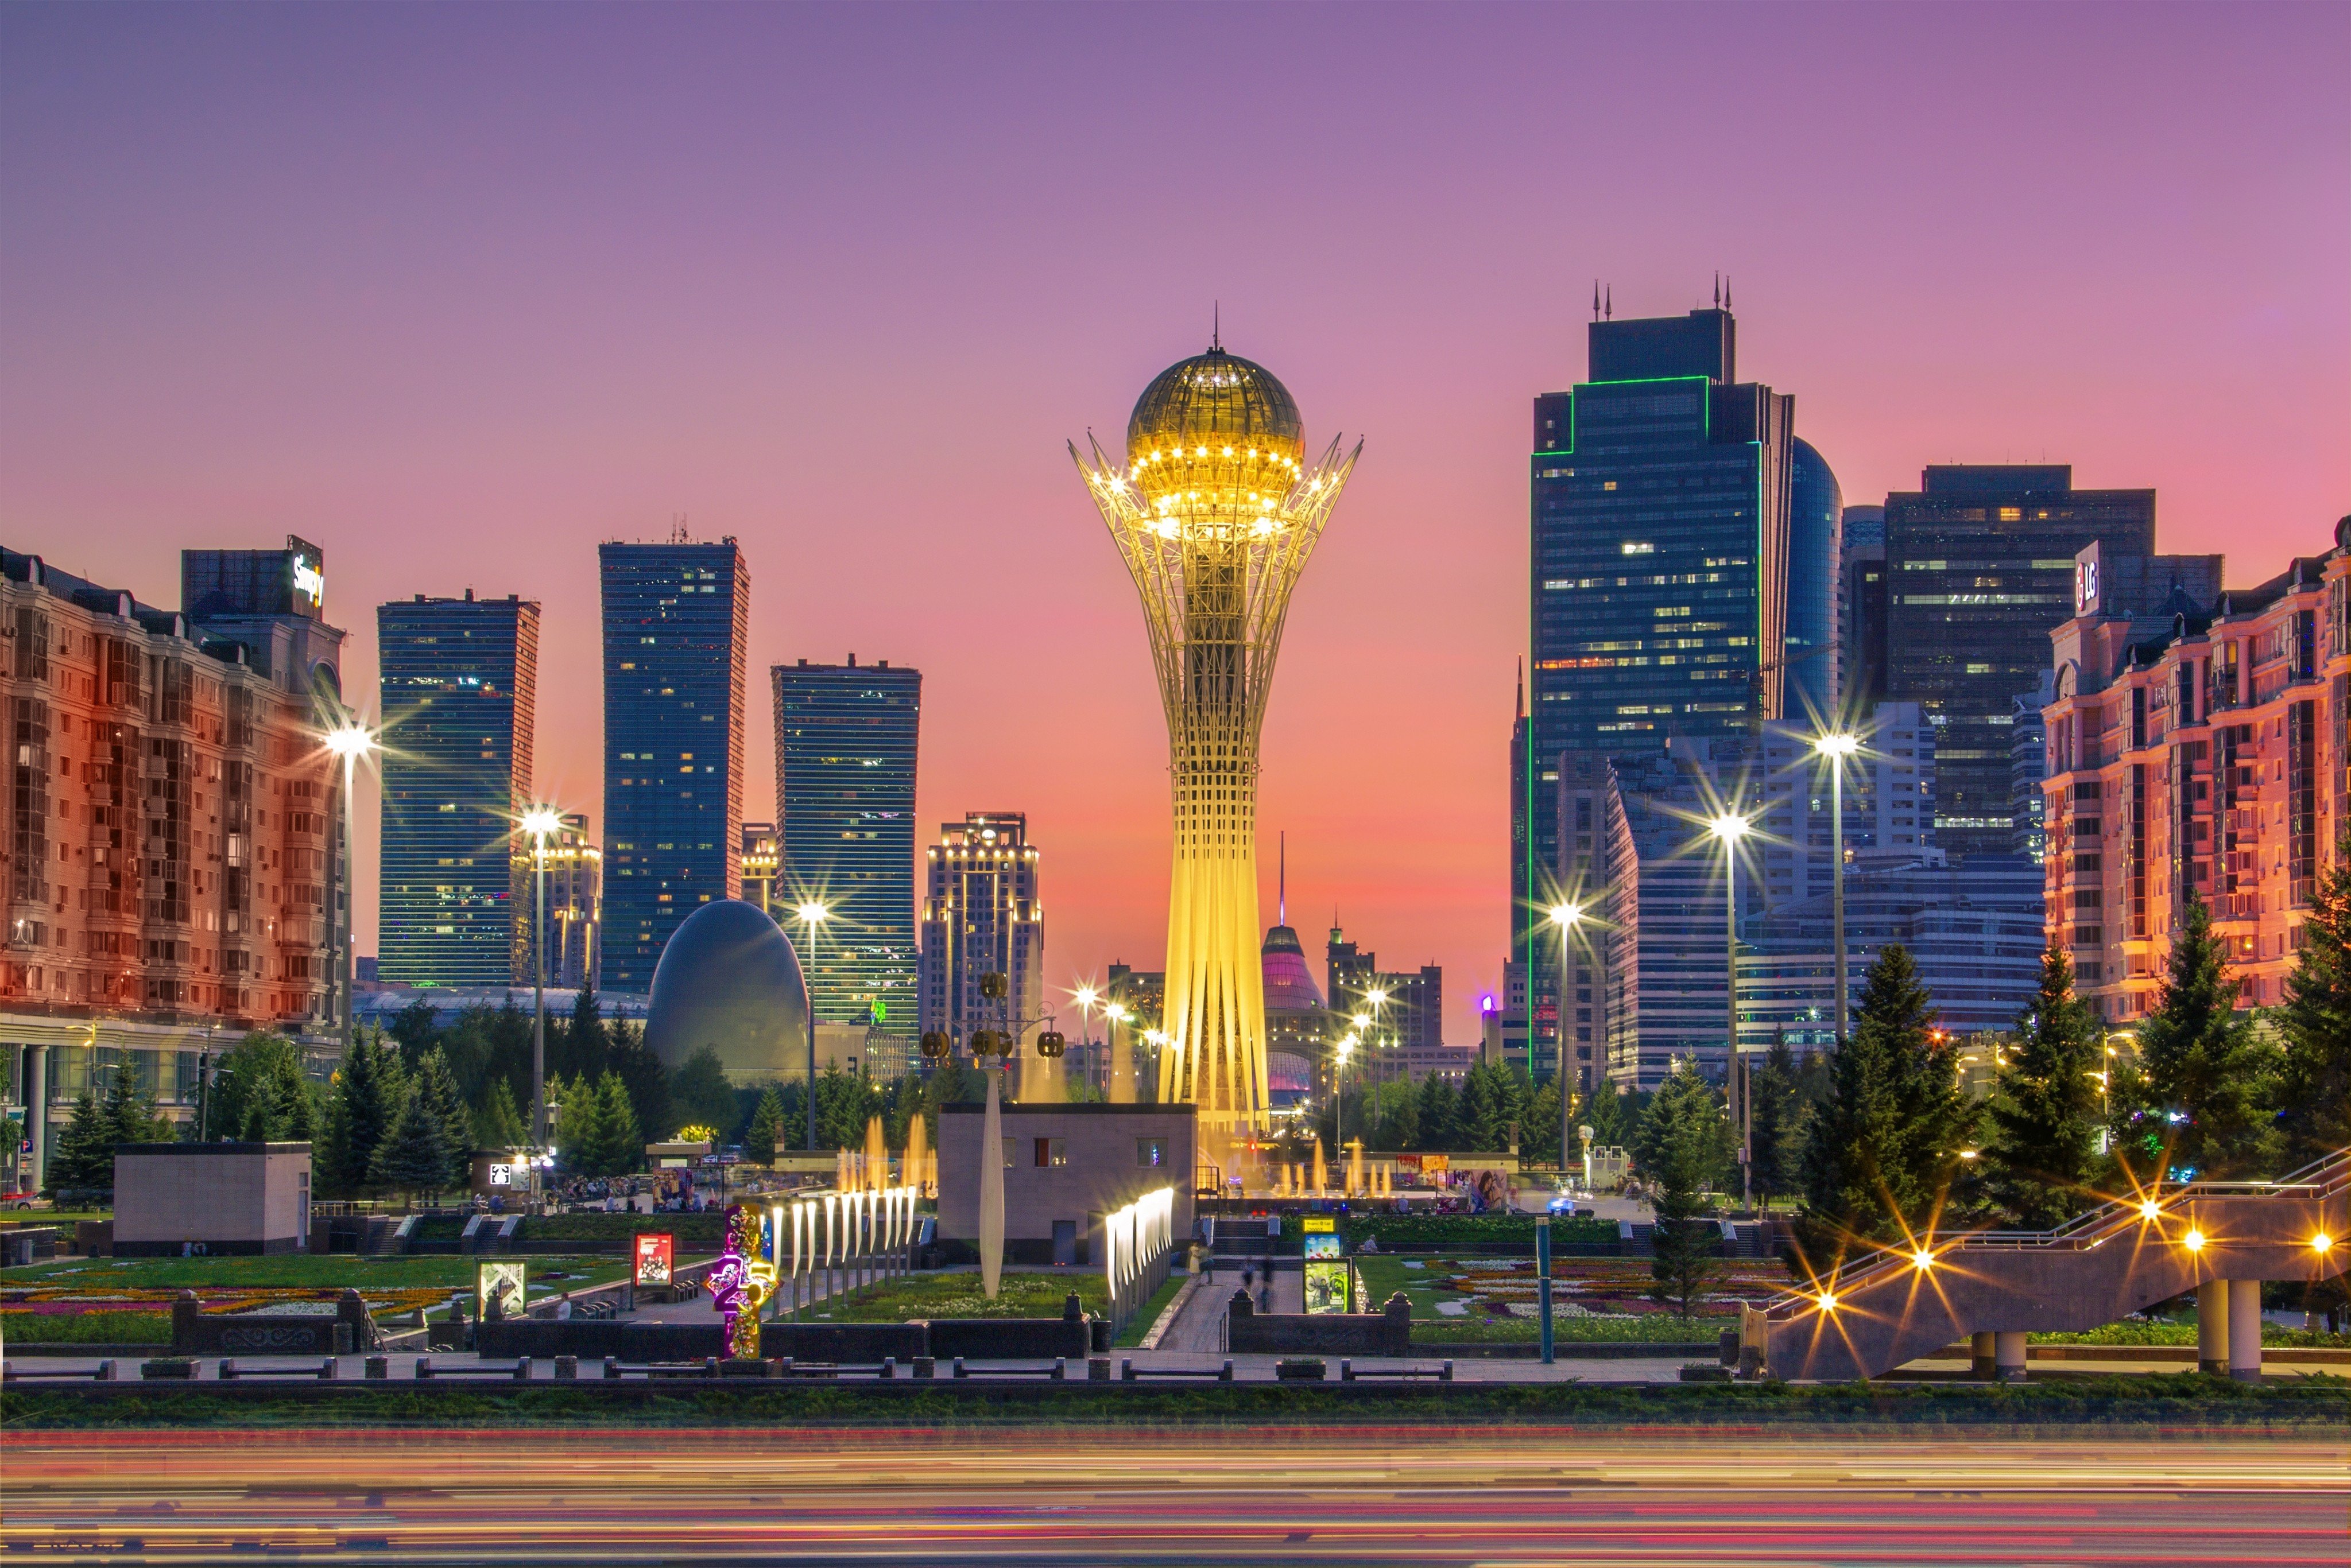 President Xi Jinping made a state visit to Kazakhstan this week and met President Kassym-Jomart Tokayev in the capital Astana (pictured). Photo: Shutterstock